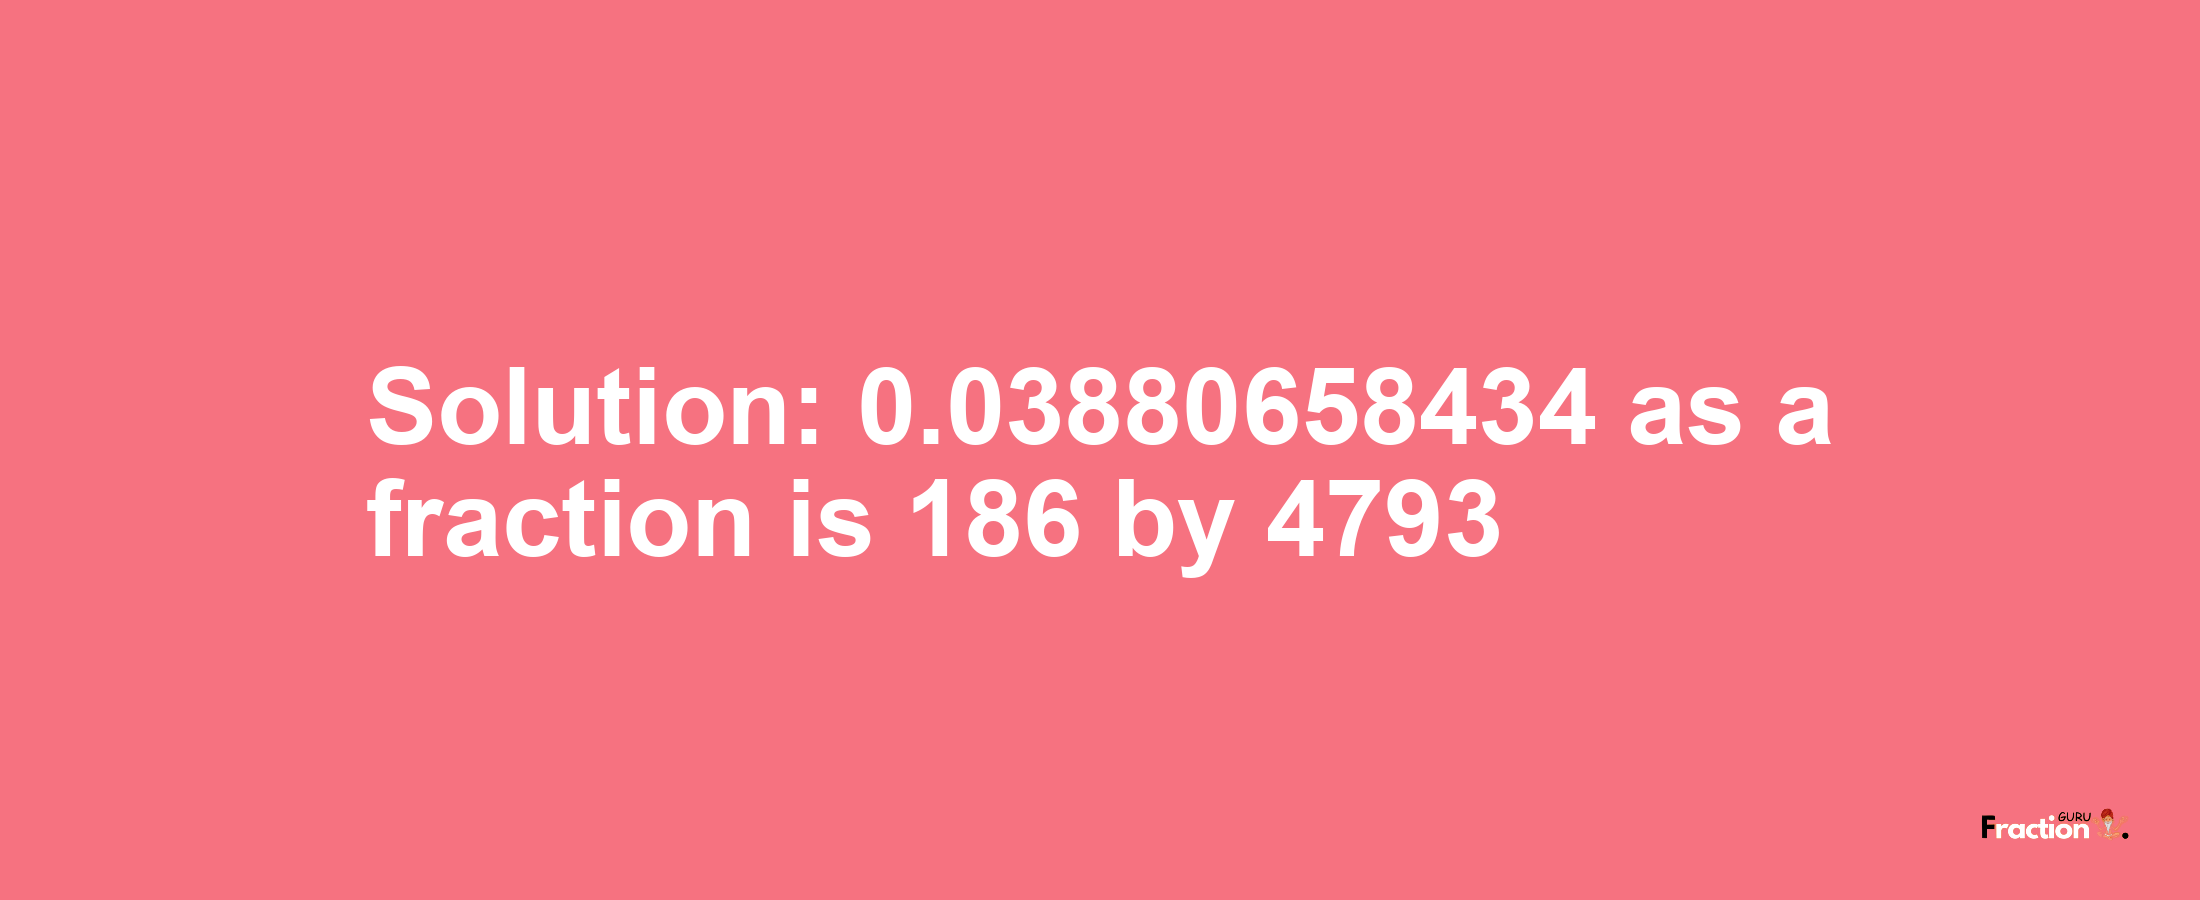 Solution:0.03880658434 as a fraction is 186/4793